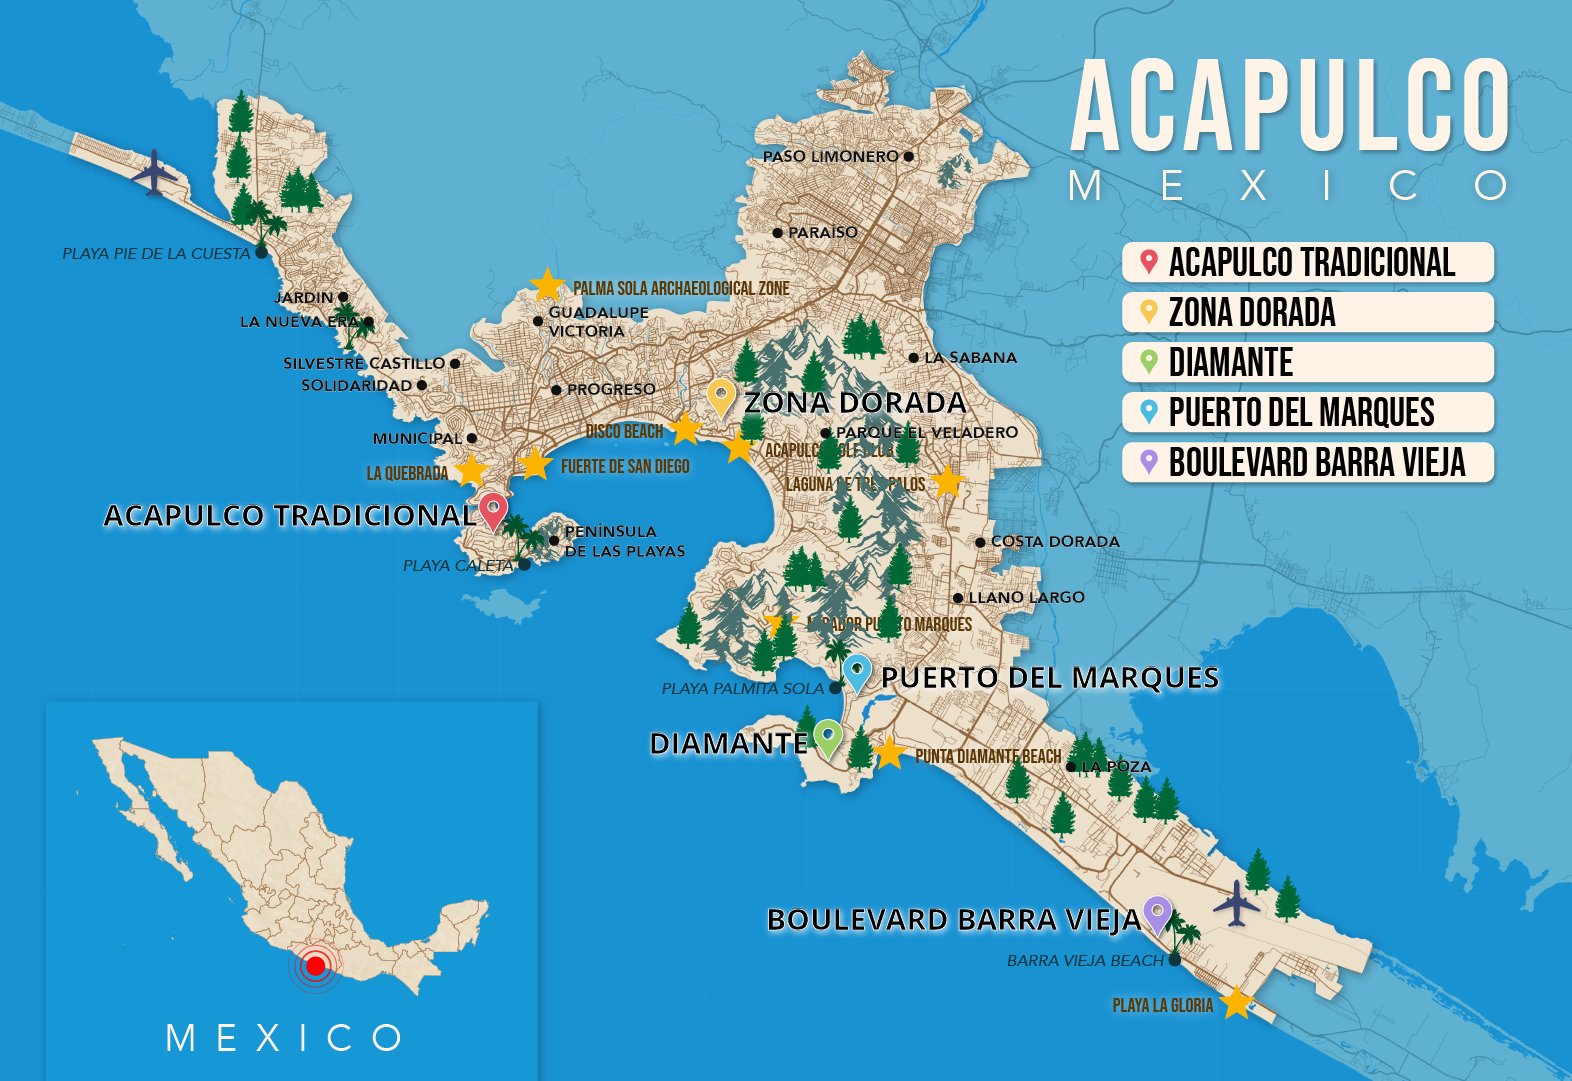 Where to Stay in Acapulco map in vector format featuring the best areas of town